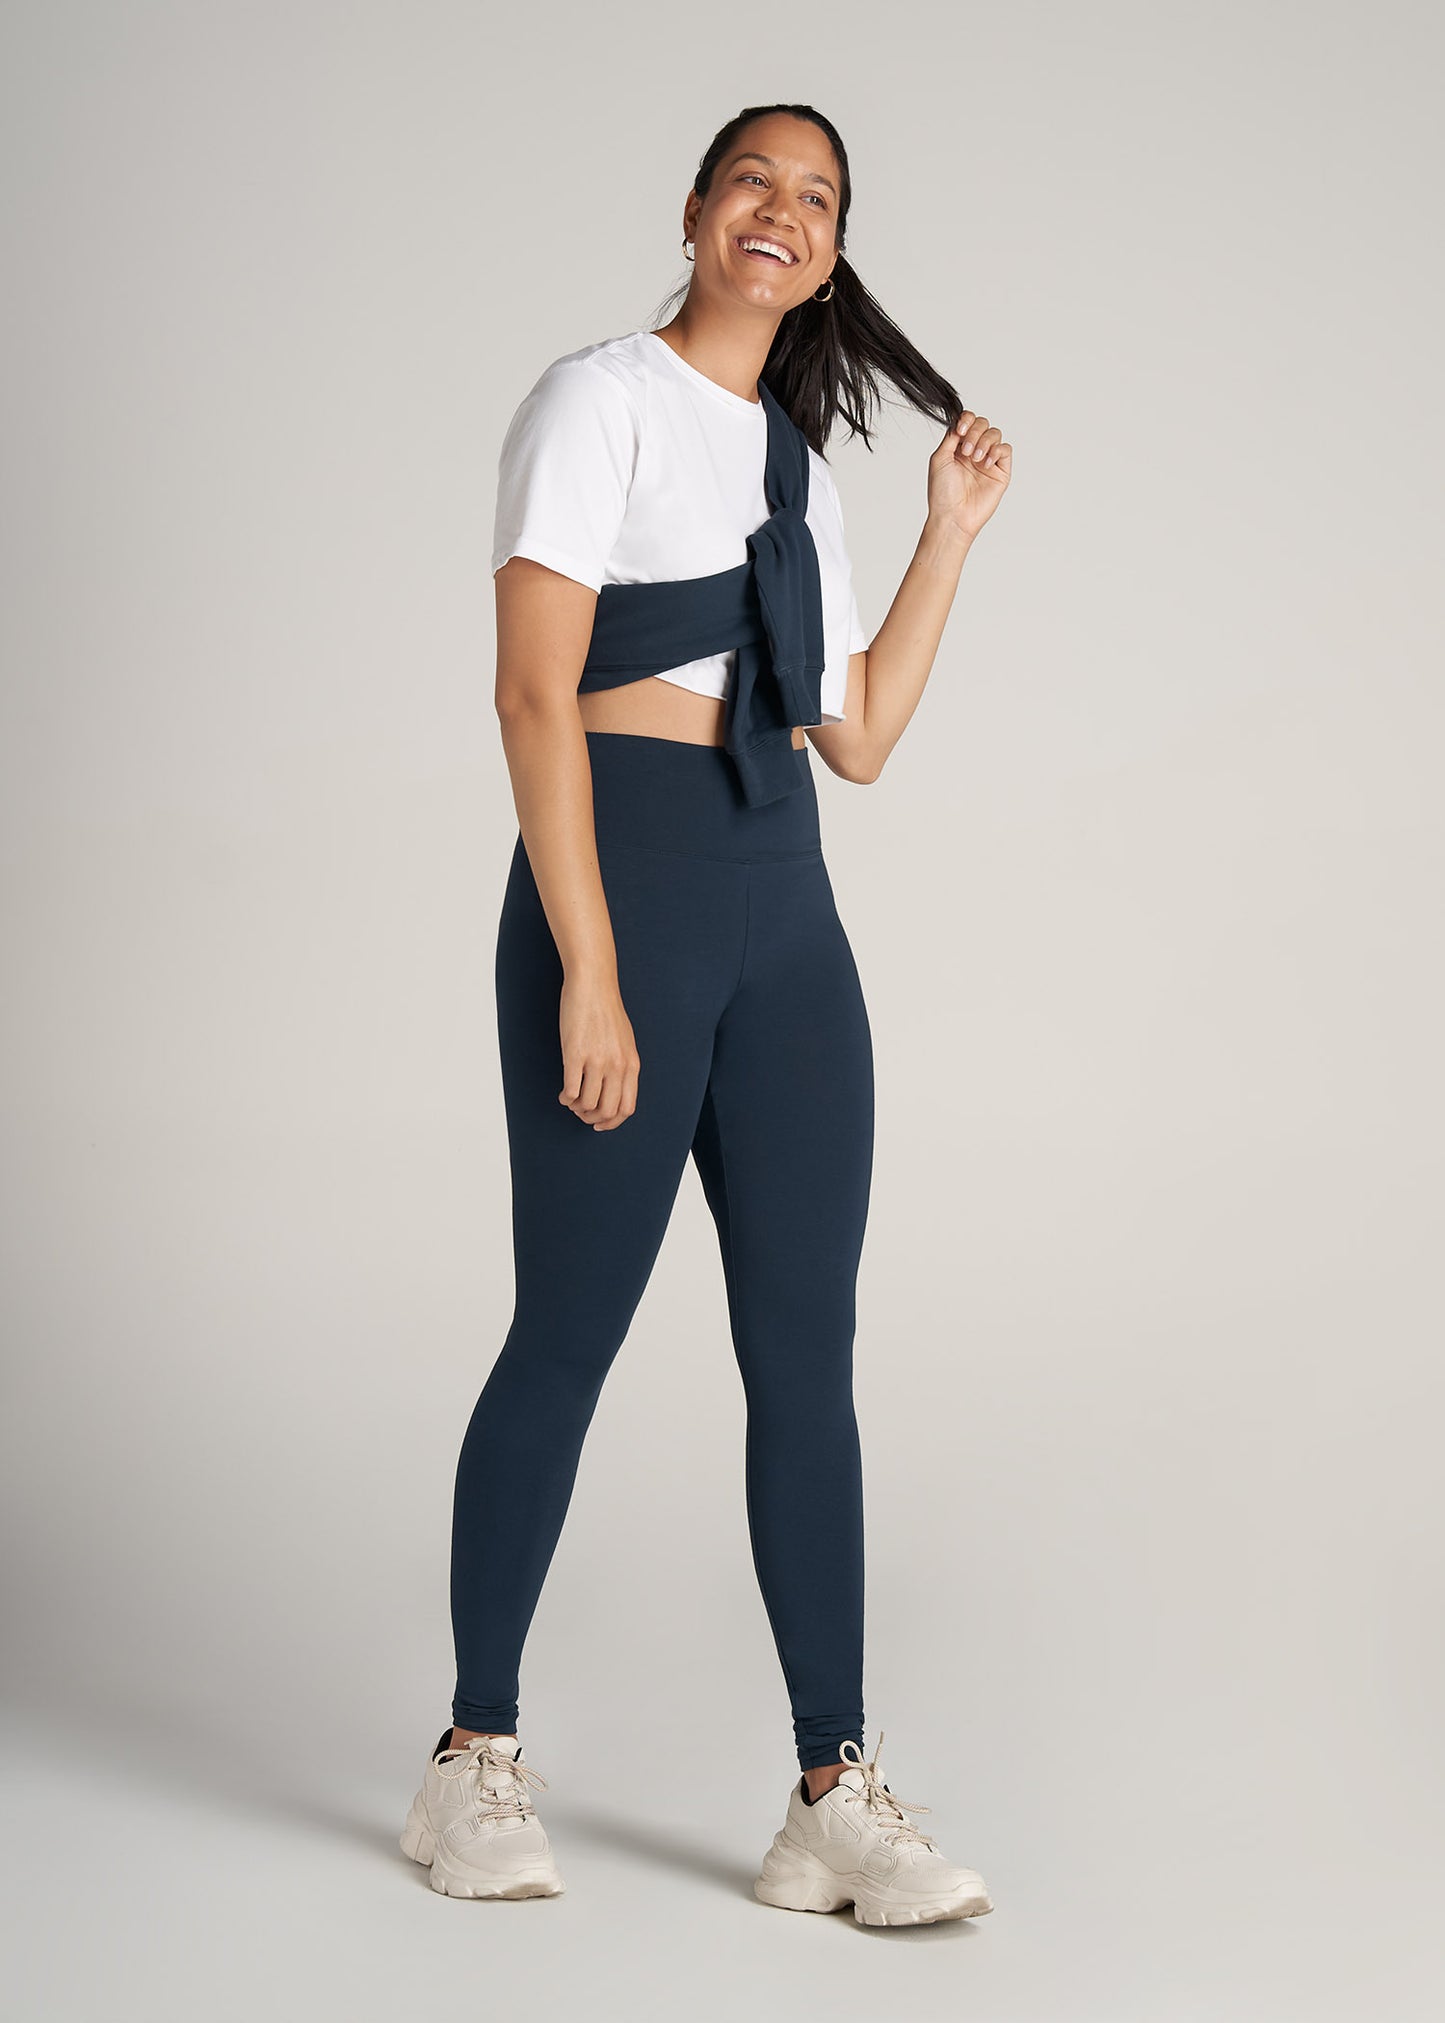 Extra Long Navy Stretch Leggings  Made For Tall Women - HEIGHT-OF-FASHION